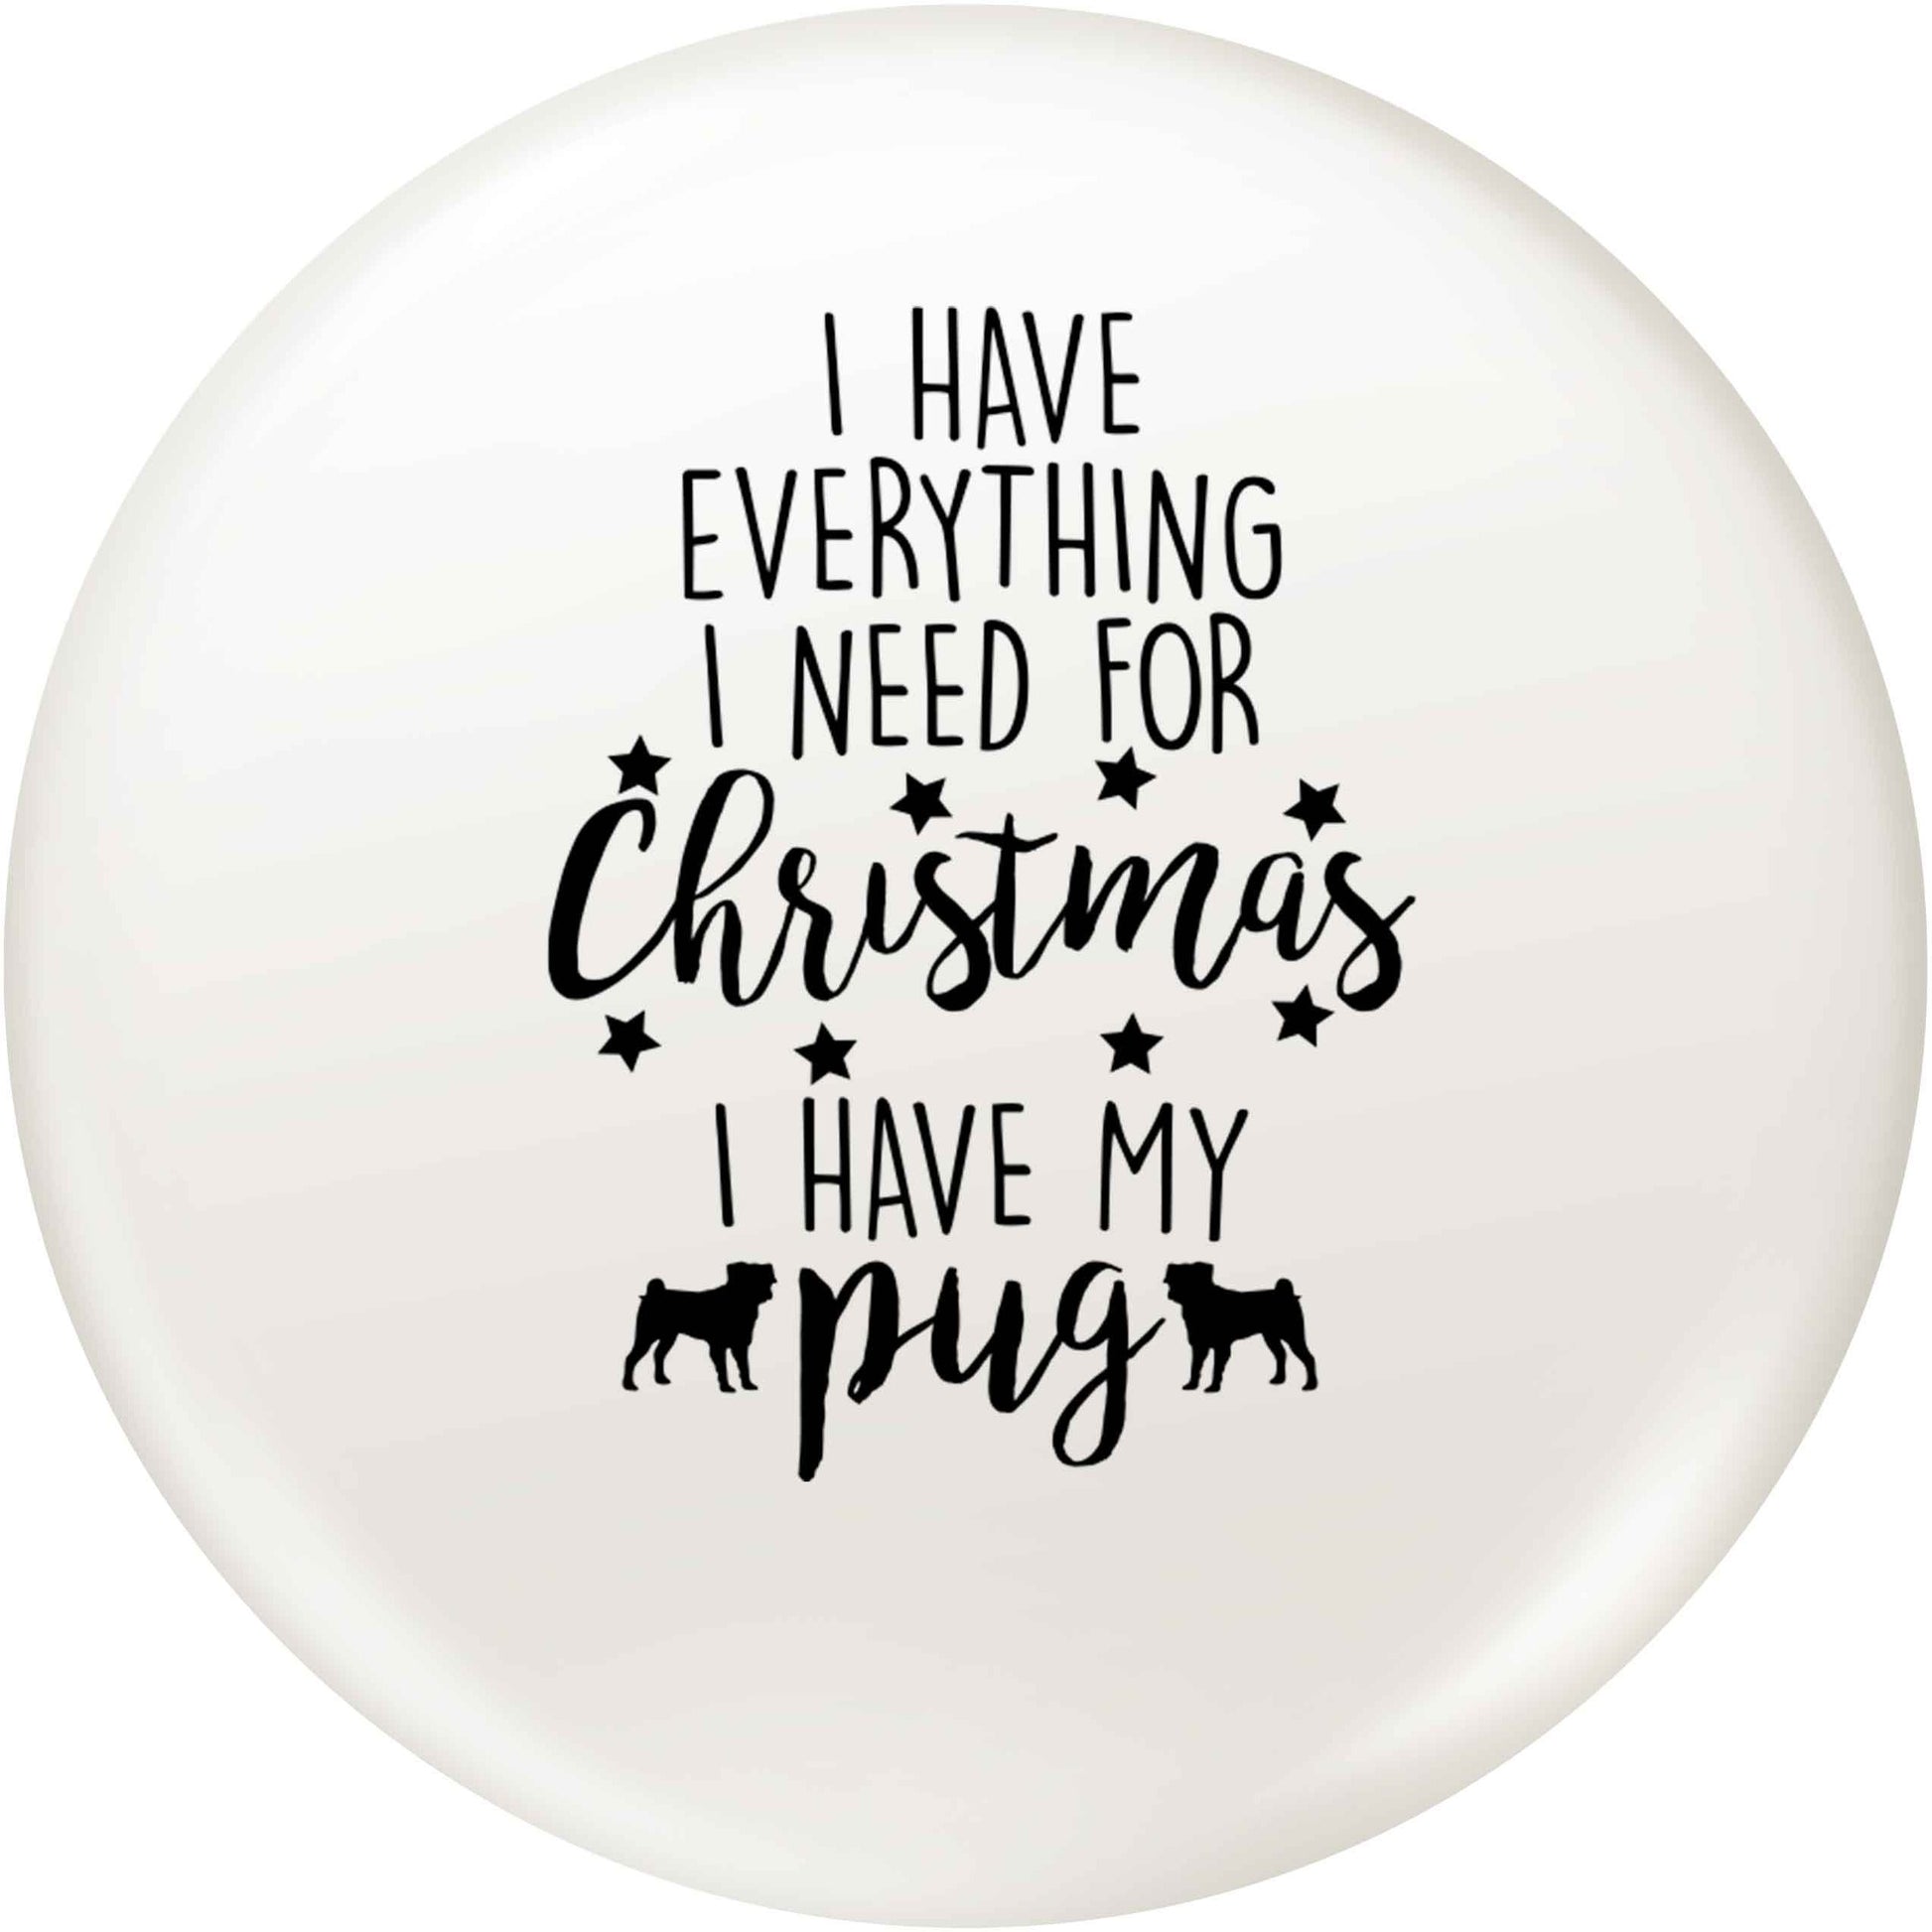 I have everything I need for Christmas I have my pug small 25mm Pin badge